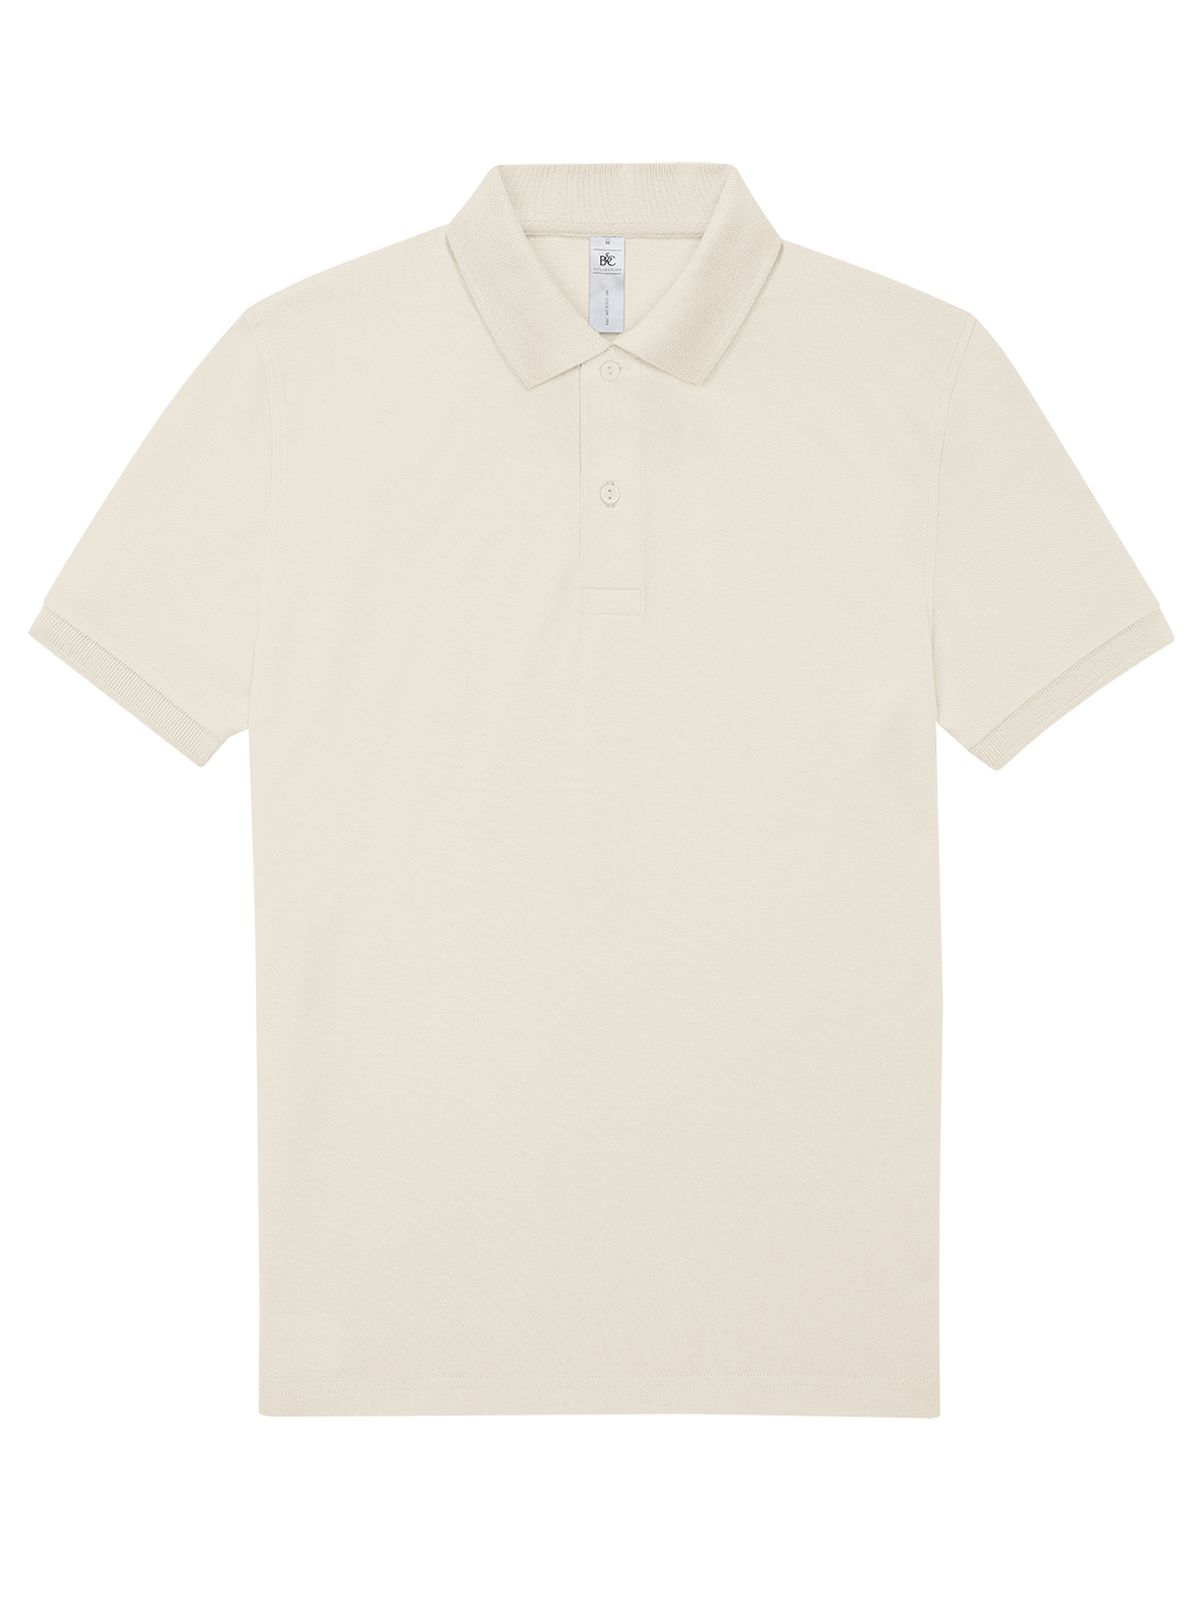 bc-my-polo-180-off-white.webp